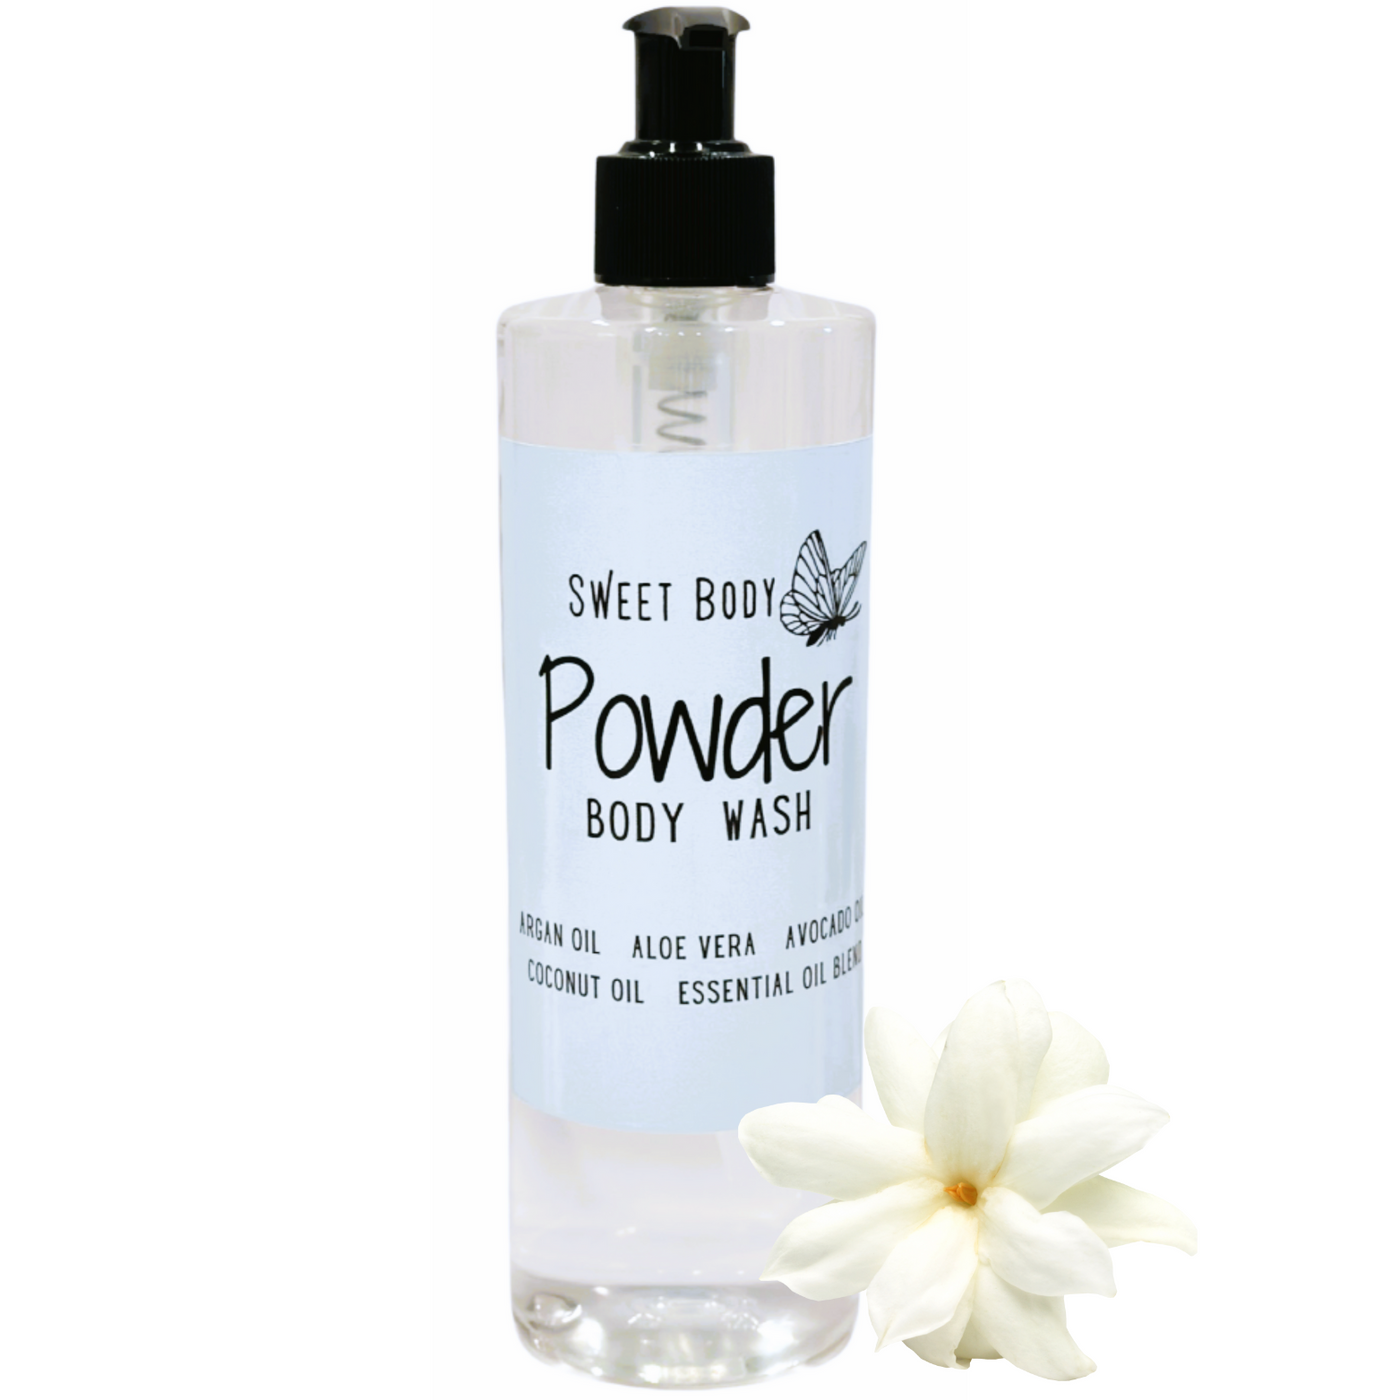 Baby Powder Natural Body Wash for Women, Men | Sulfate Free, Paraben Free, Dye Free, with Naturally Derived Clean Ingredients Leaving Skin Soft and Hydrating 16oz.(Free Loofah!)